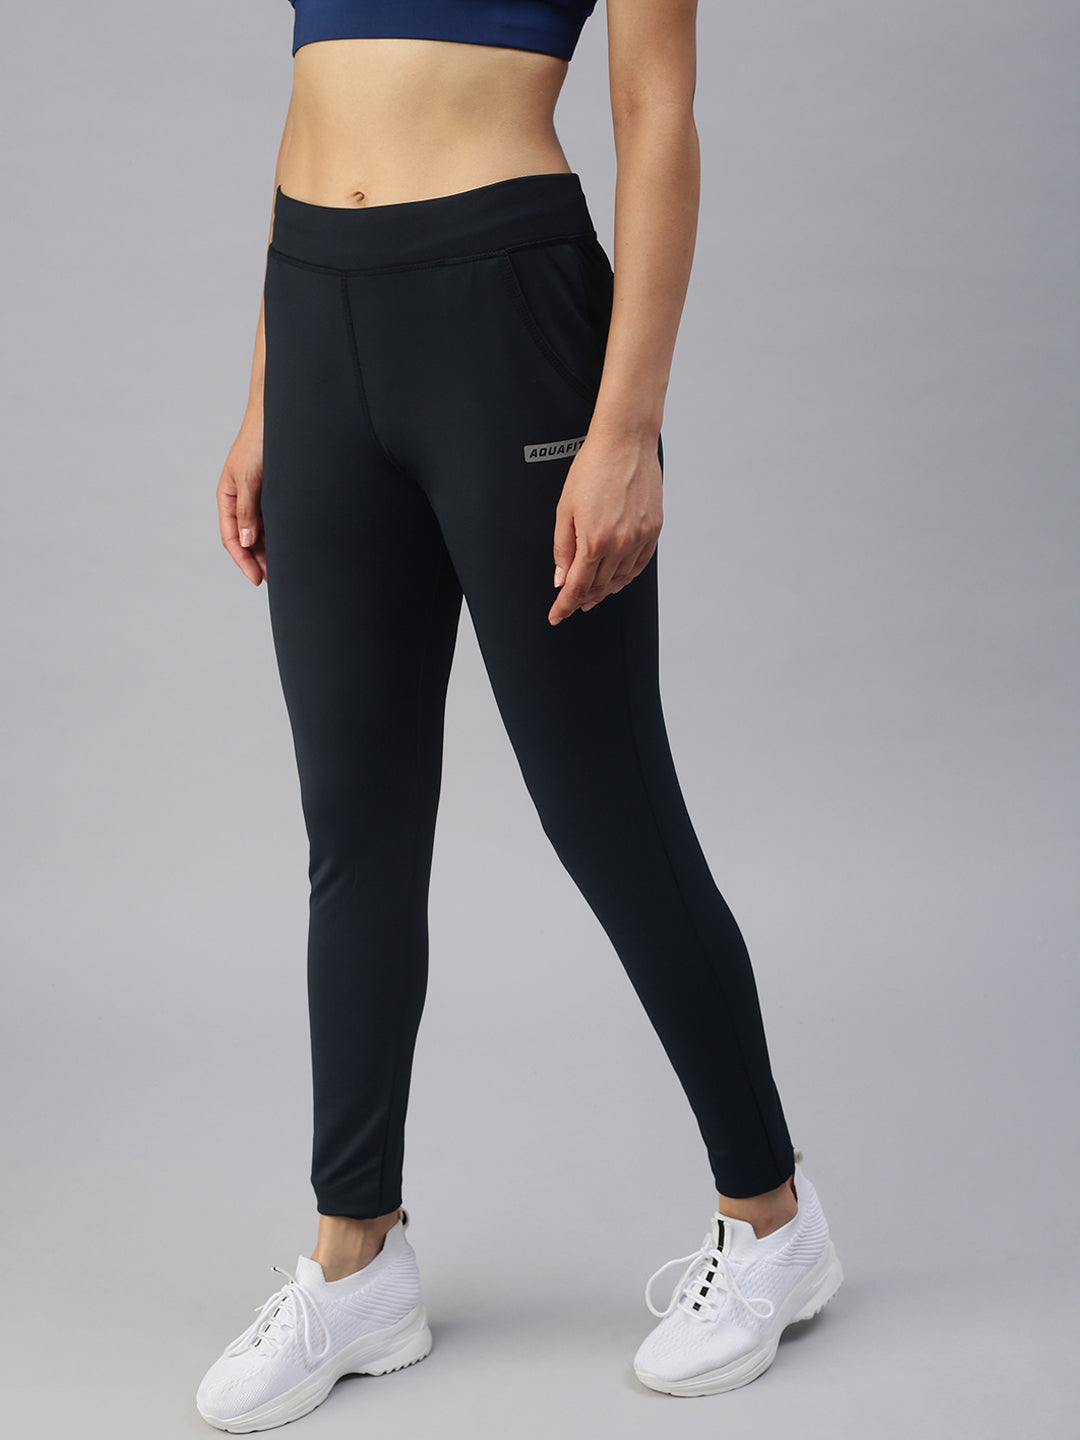 Women's Navy Blue Solid Track Pants